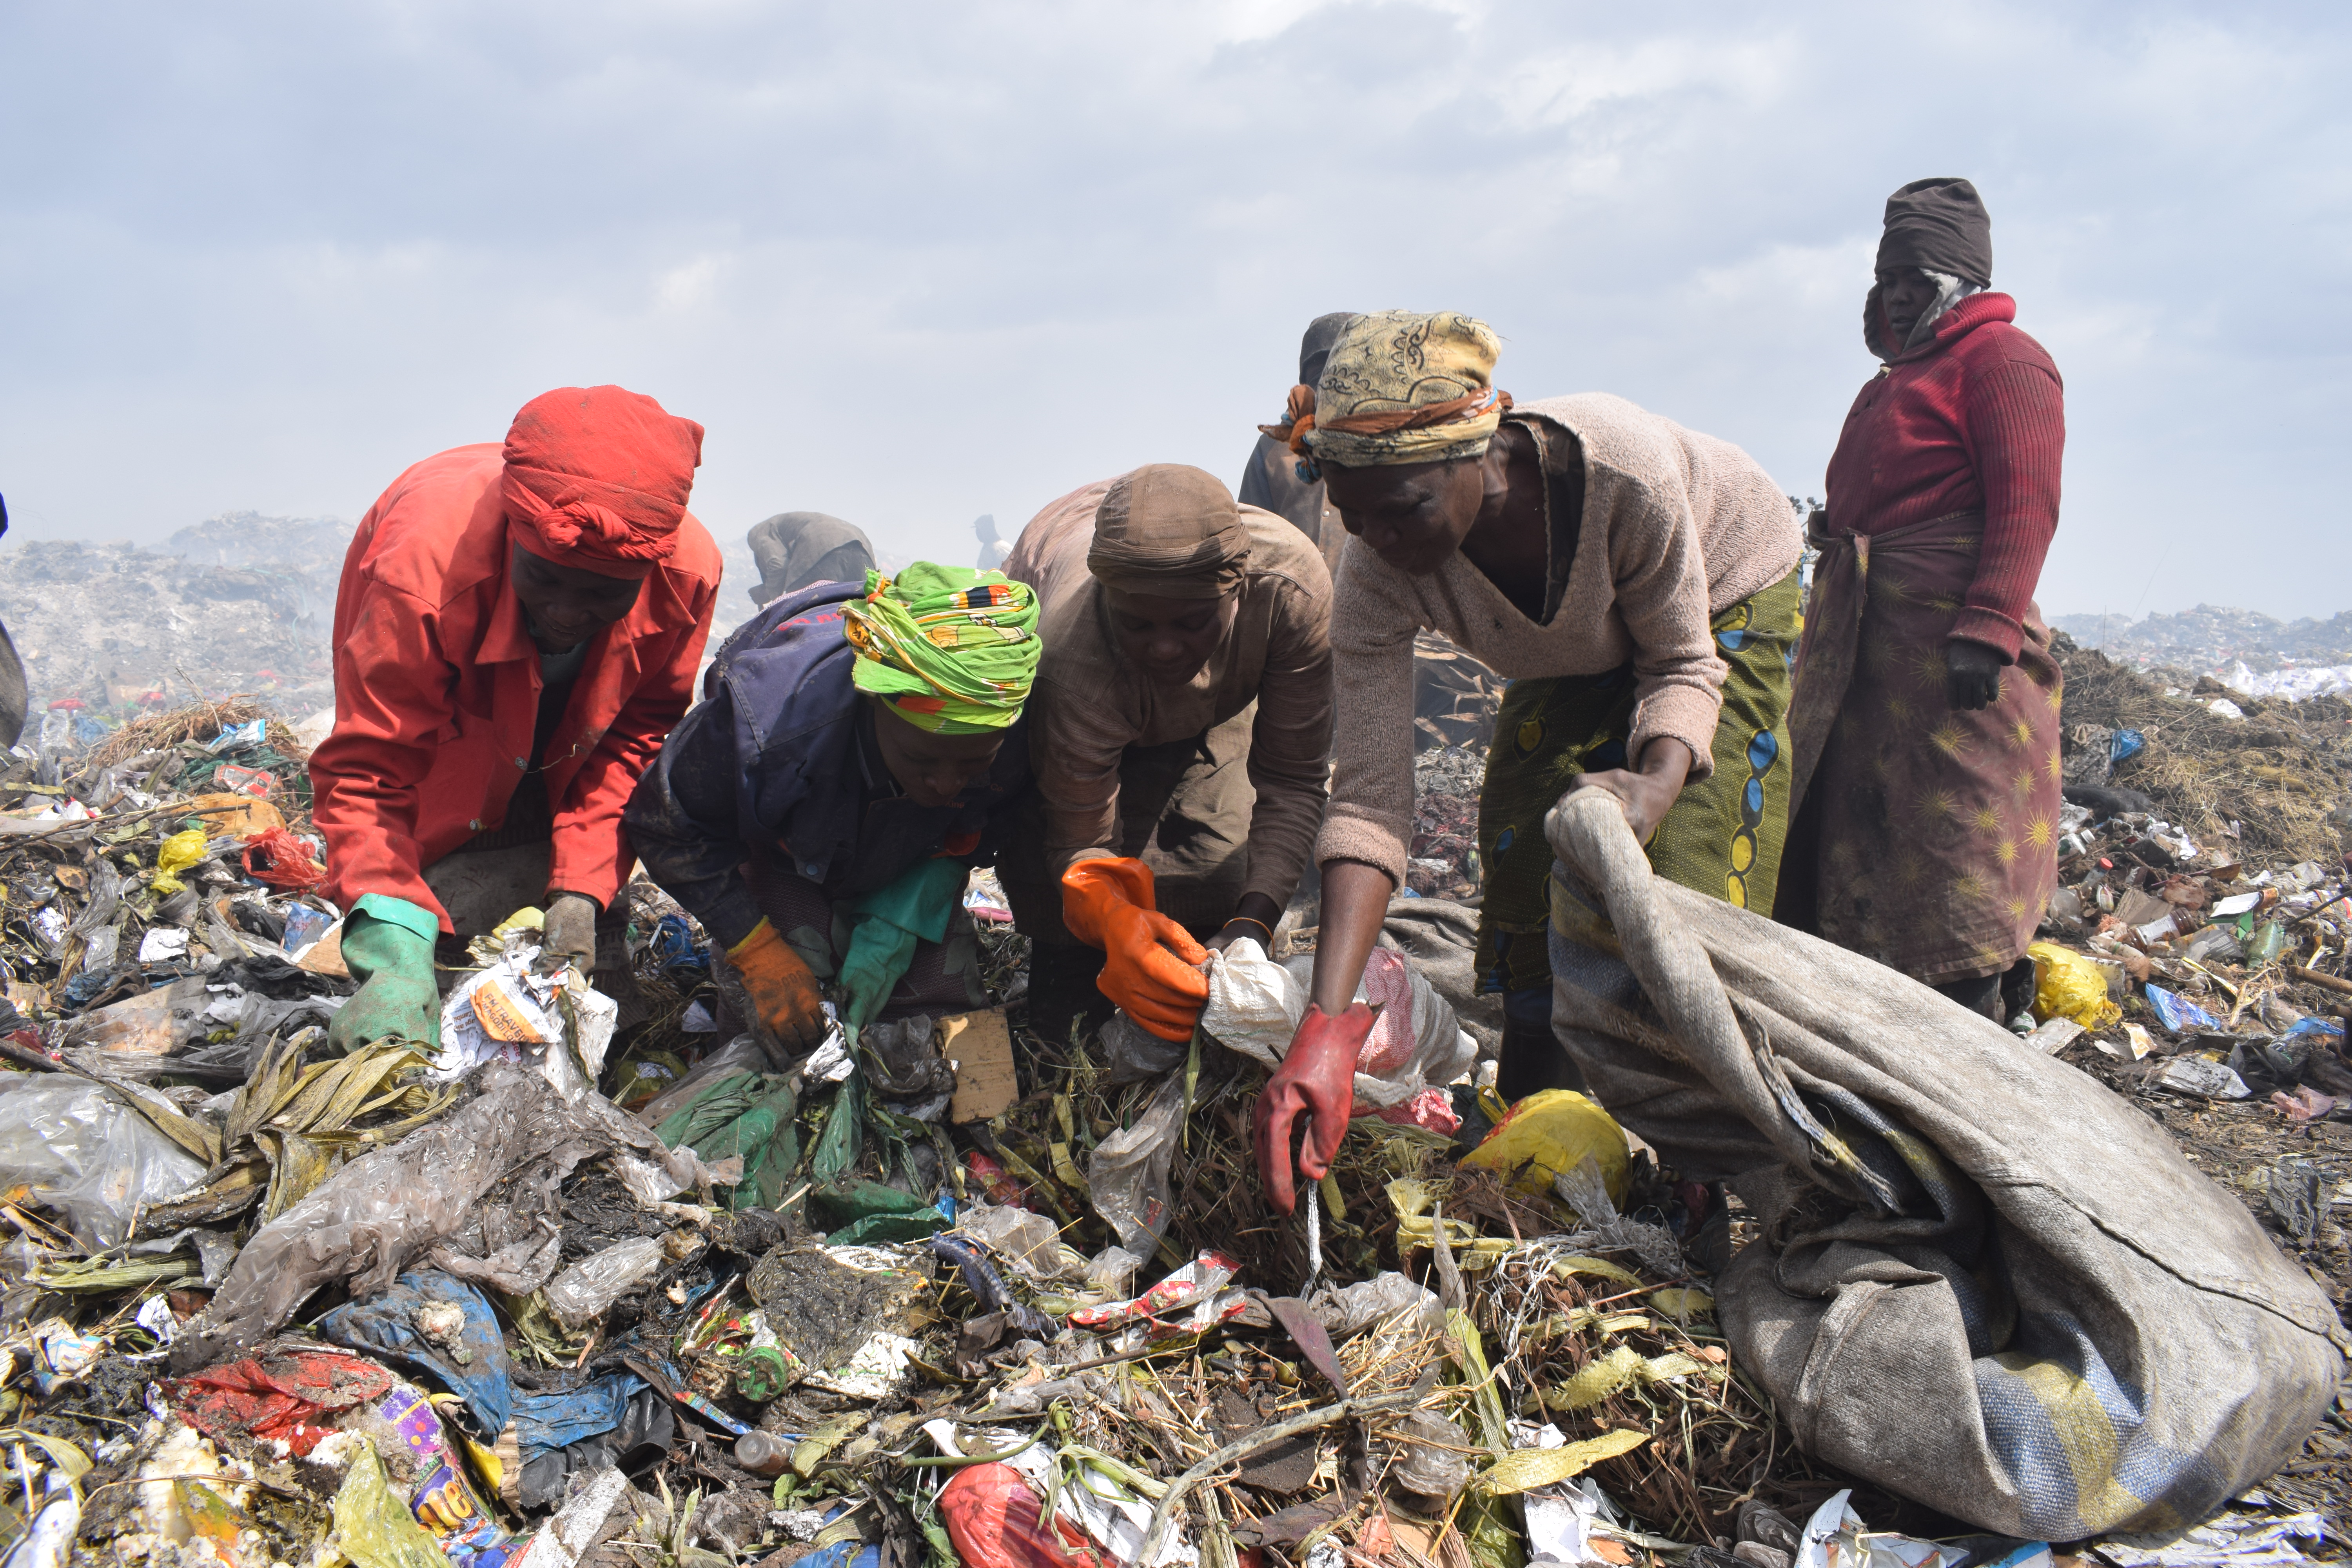 Wastepickers in Zambia sort through landfill